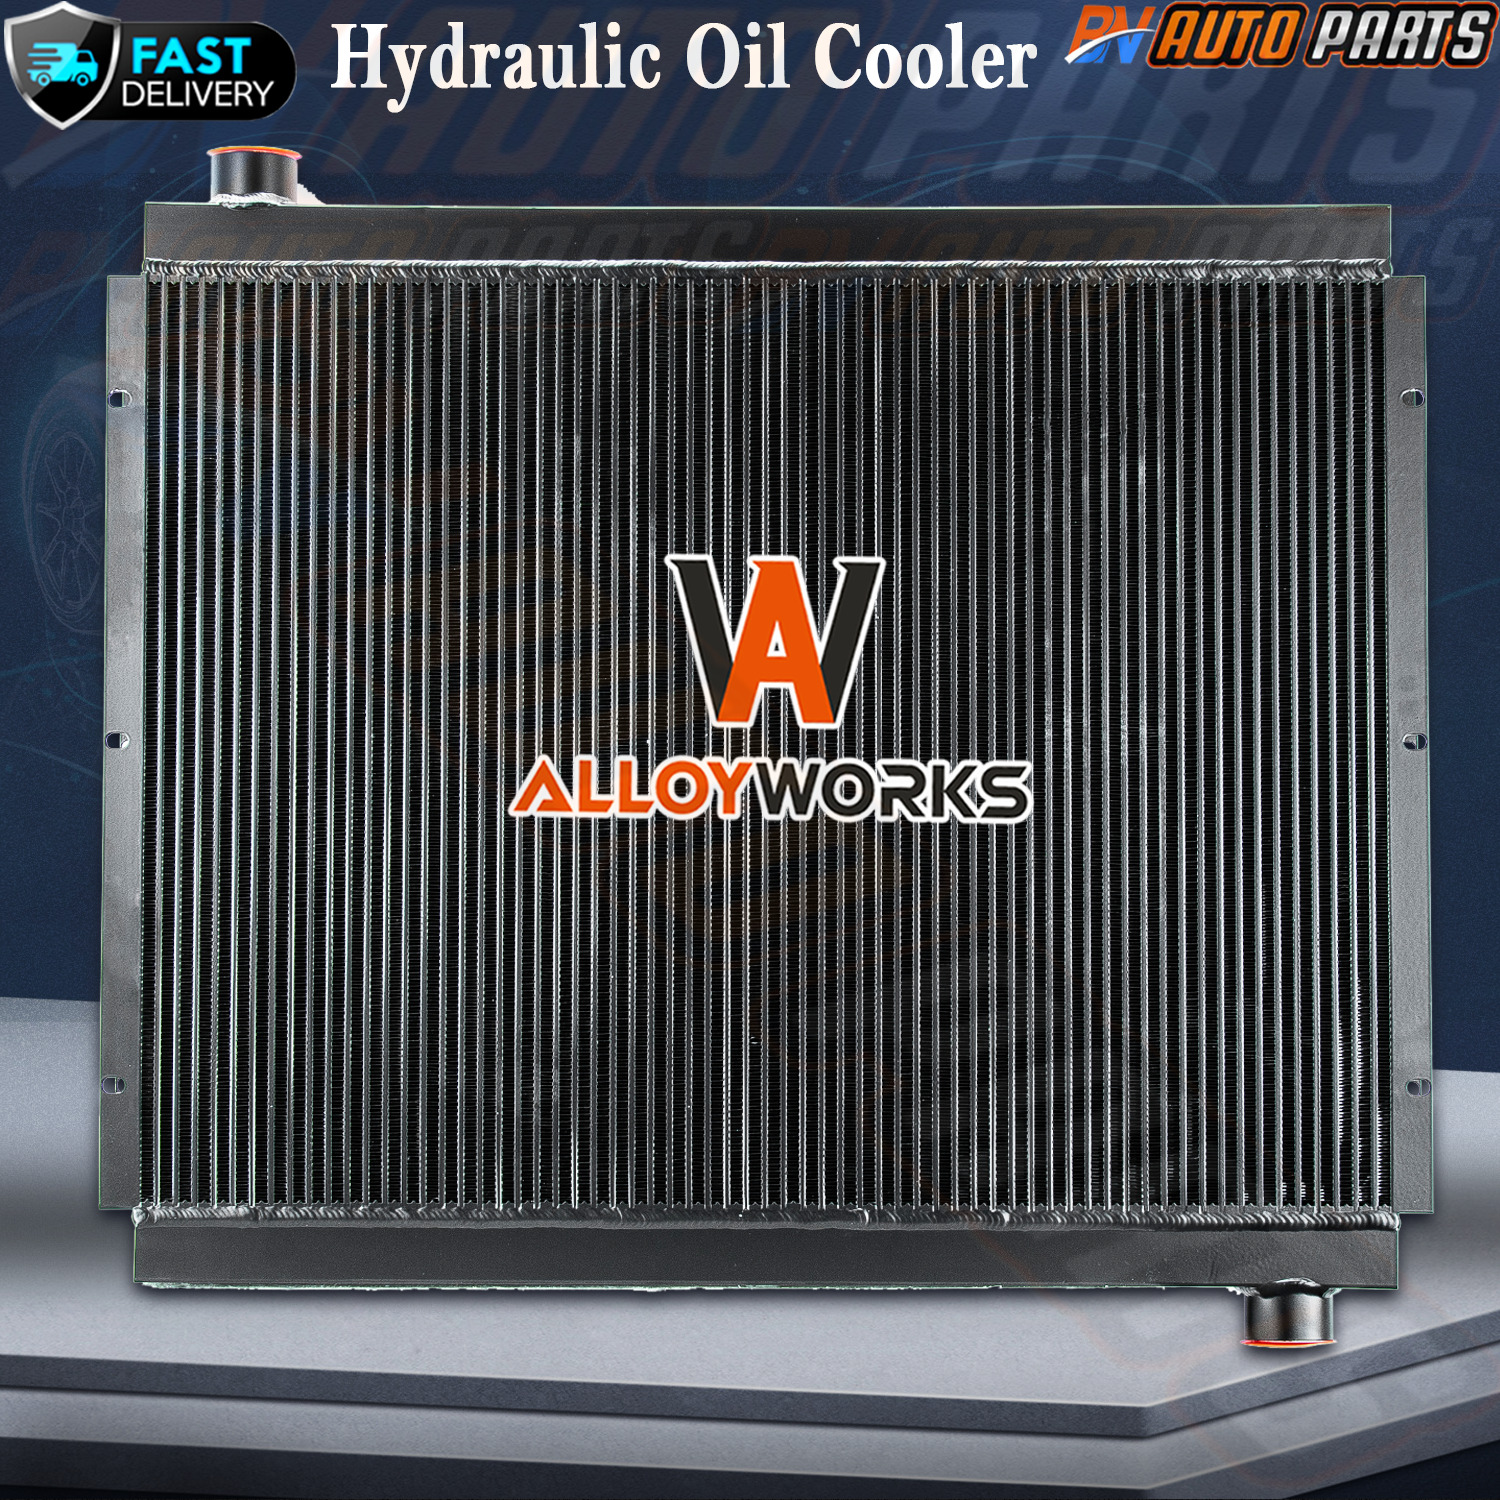 Aluminum Hydraulic Oil Cooler For Industrial Hydraulic Cooling System Heavy Duty